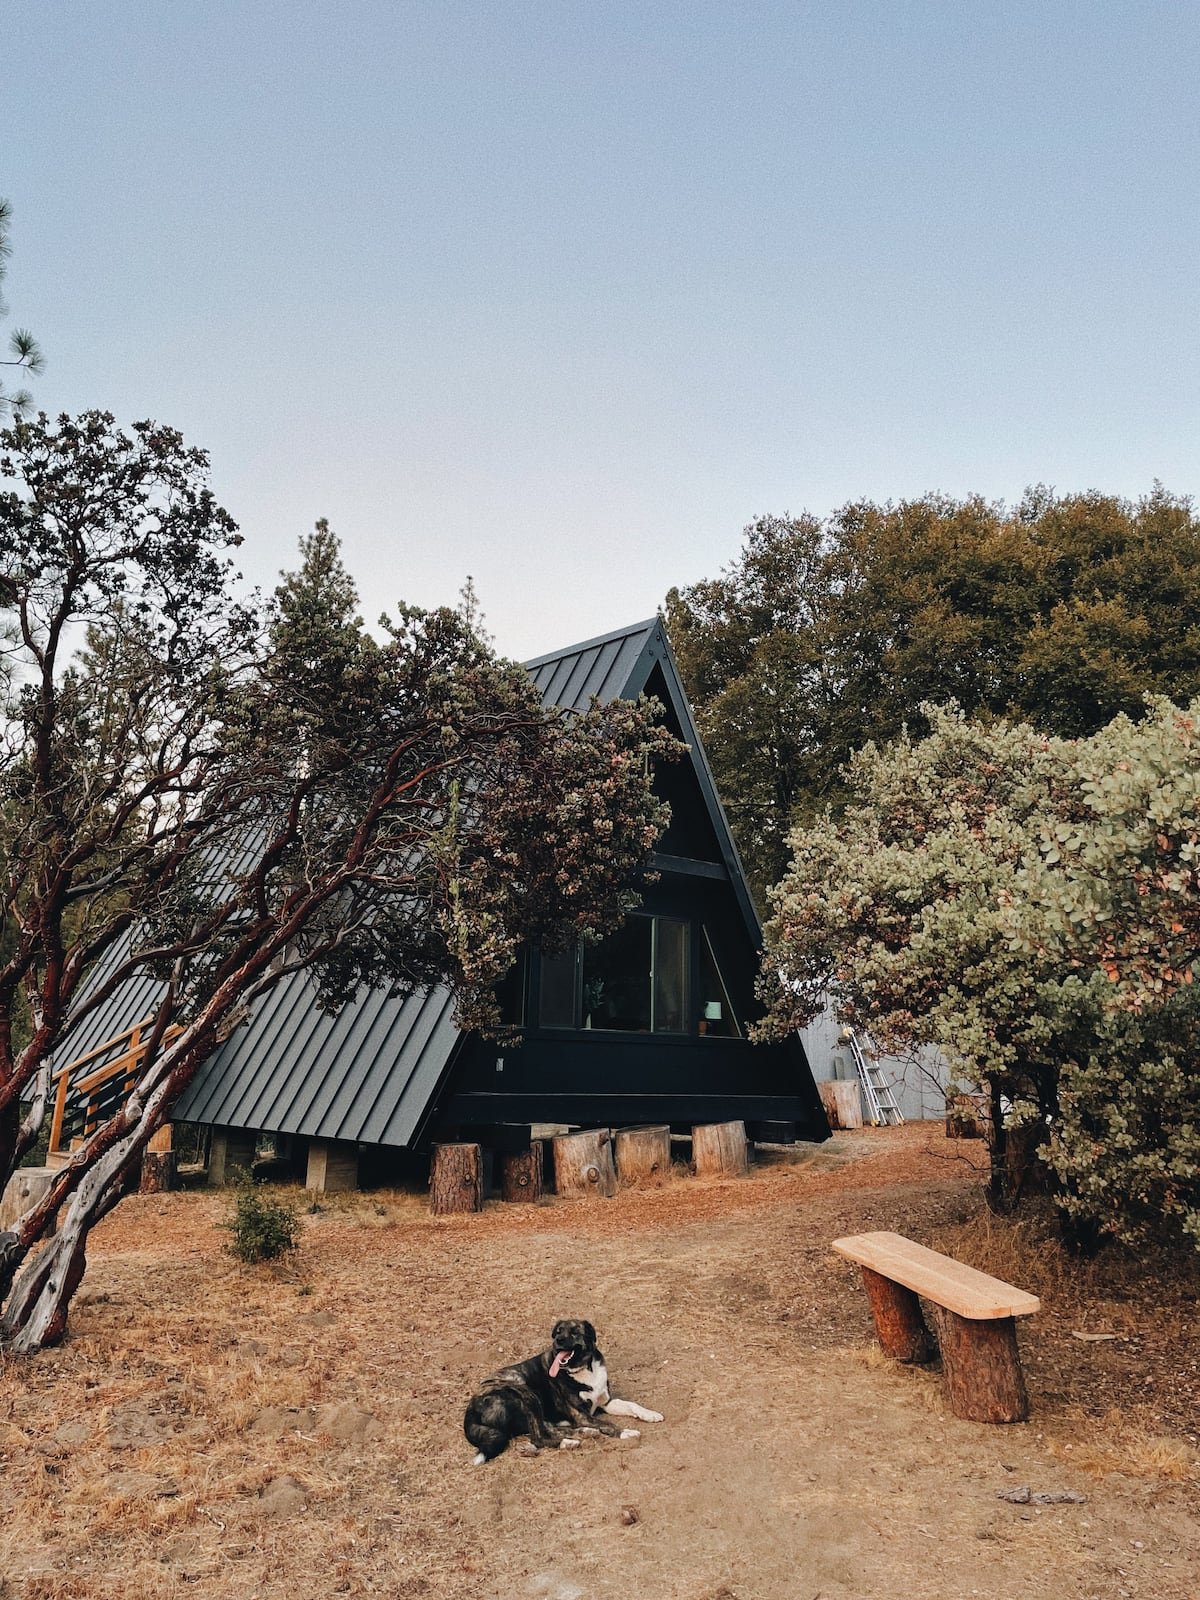  Forget your worries at this well-designed and  welcoming A-frame  located on the edge of Yosemite National Park. You and your pack will be surrounded by tranquility and wonder as you plan your adventures.    Typical starting price: $246    Location: